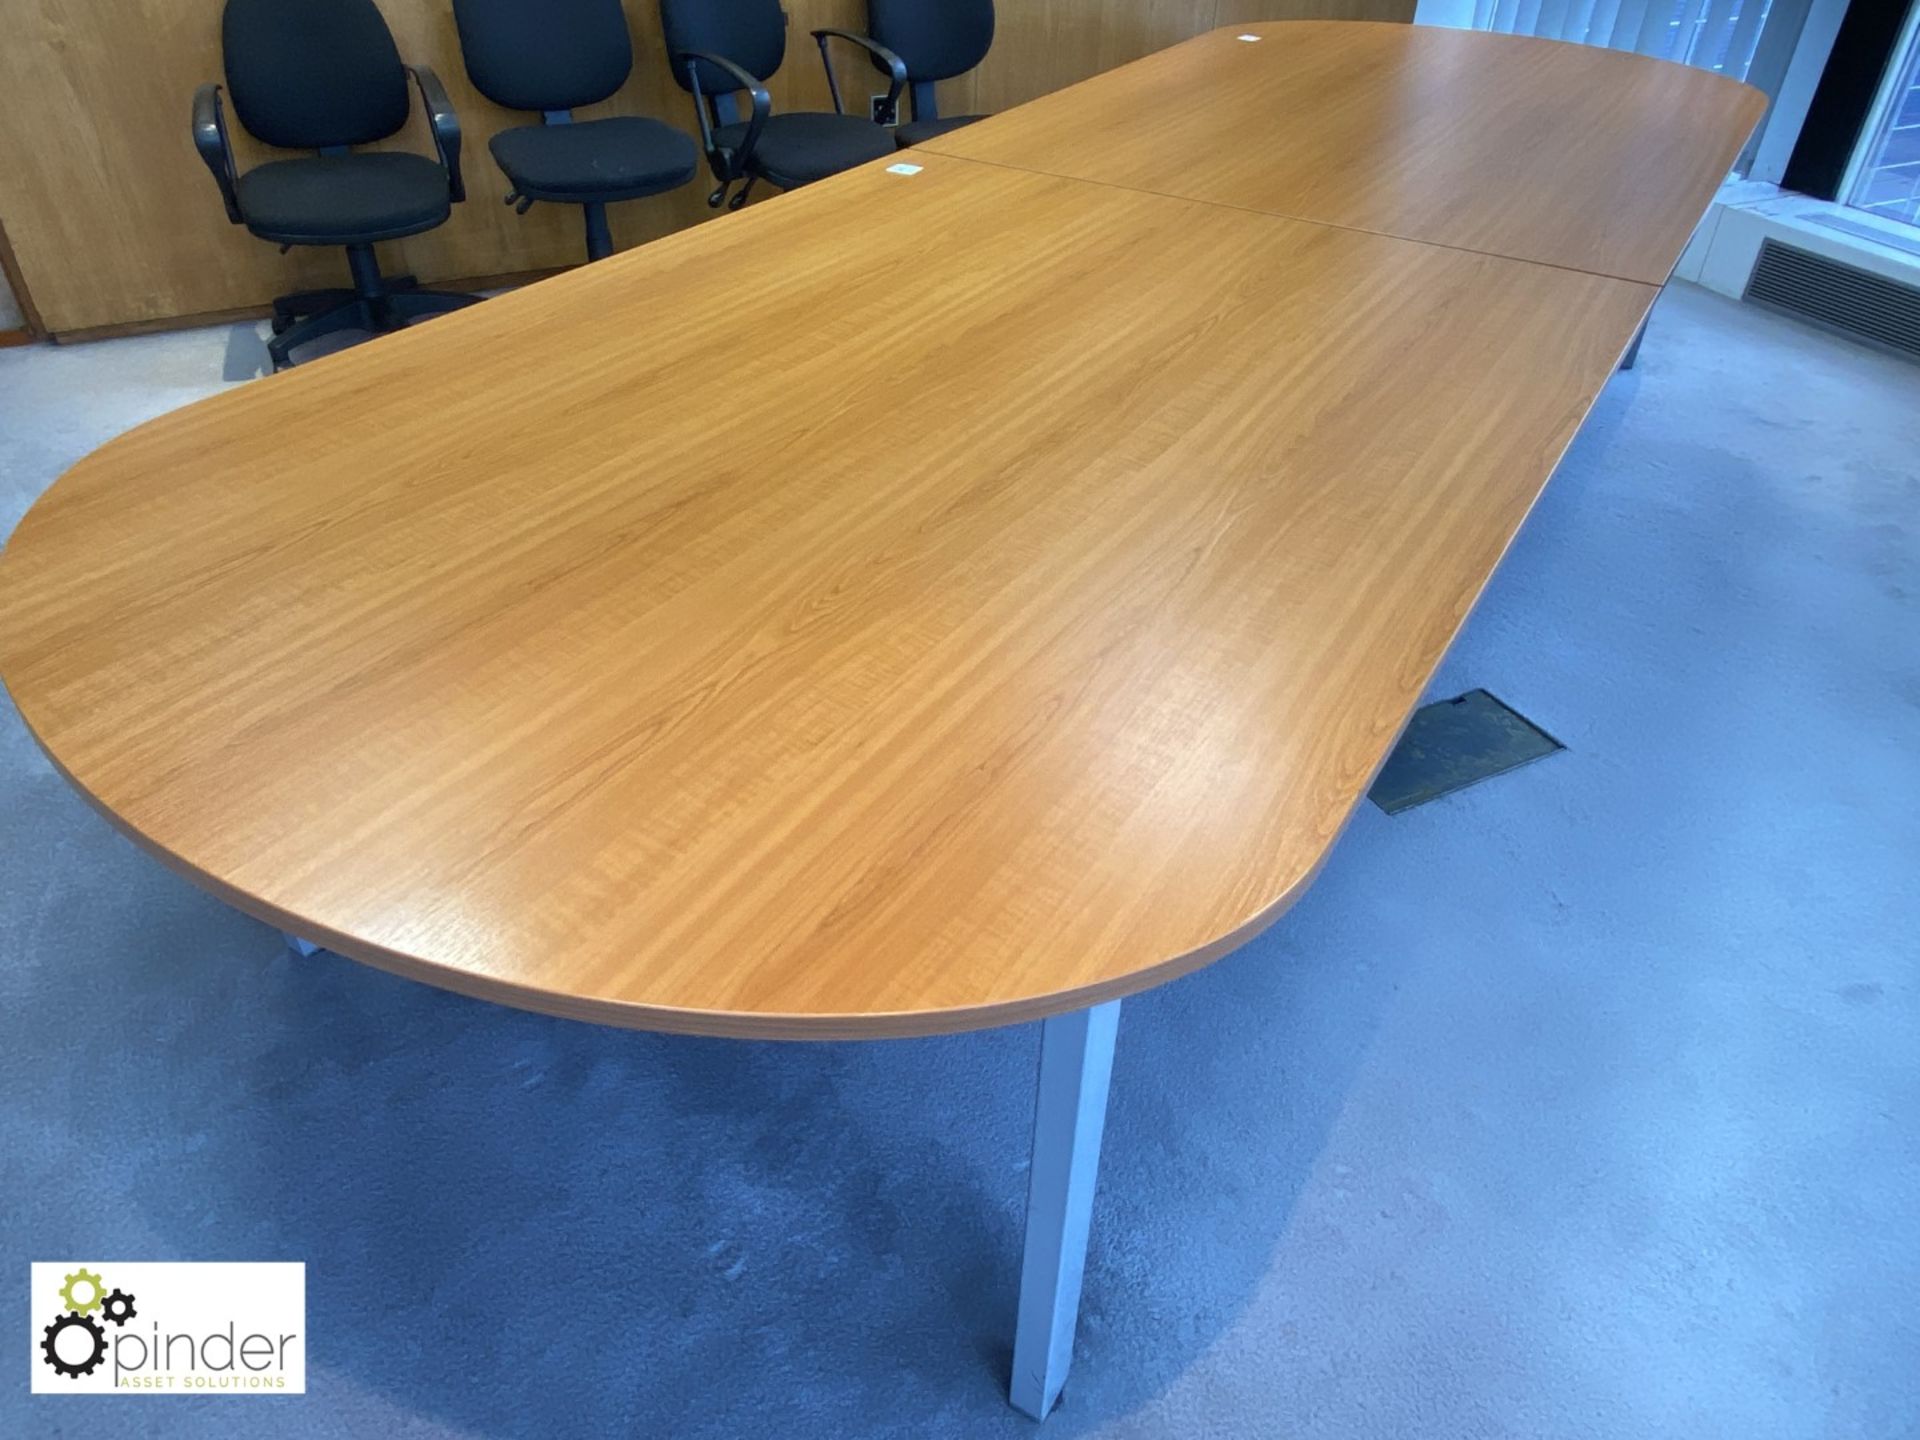 Beech effect D-end 2-section Meeting Table, 4000mm x 1400mm (located in Meeting Room 6 on 23rd - Image 2 of 4